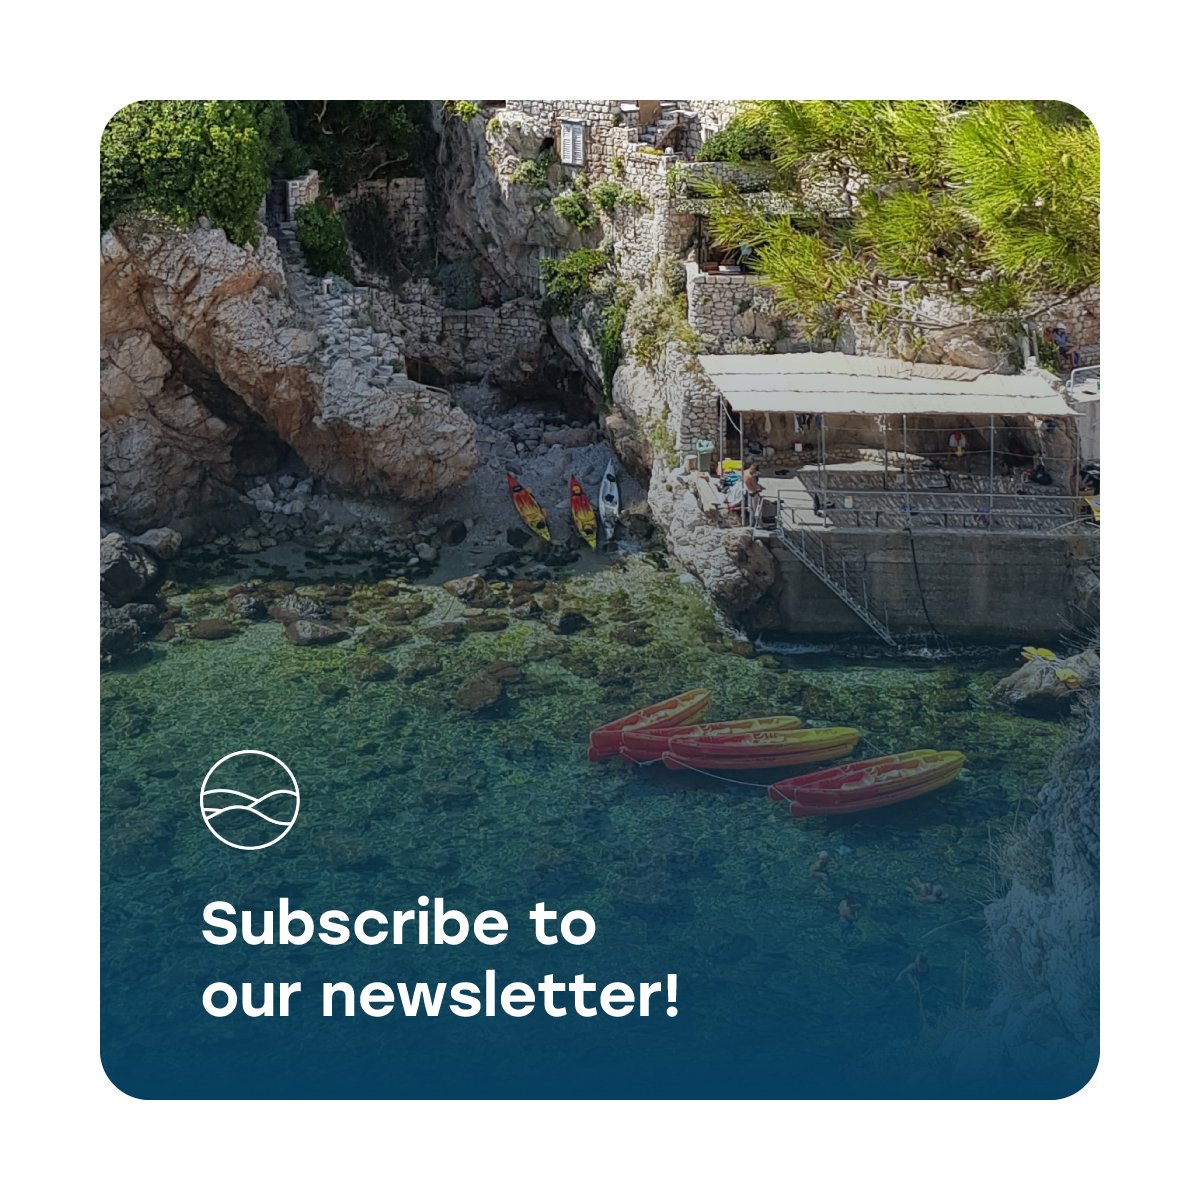 View our latest newsletter: bit.ly/3Oetw38 📘 2022 activity report 🌿 #BlueCarbon assessment 🐟 Prefinancing SSF ⛵ Award for our #mooring mgmt tool + 📣 Calls for proposals 📰 News in #conservation Subscribe: EN: bit.ly/3ilrEJO FR: bit.ly/3YgS54g